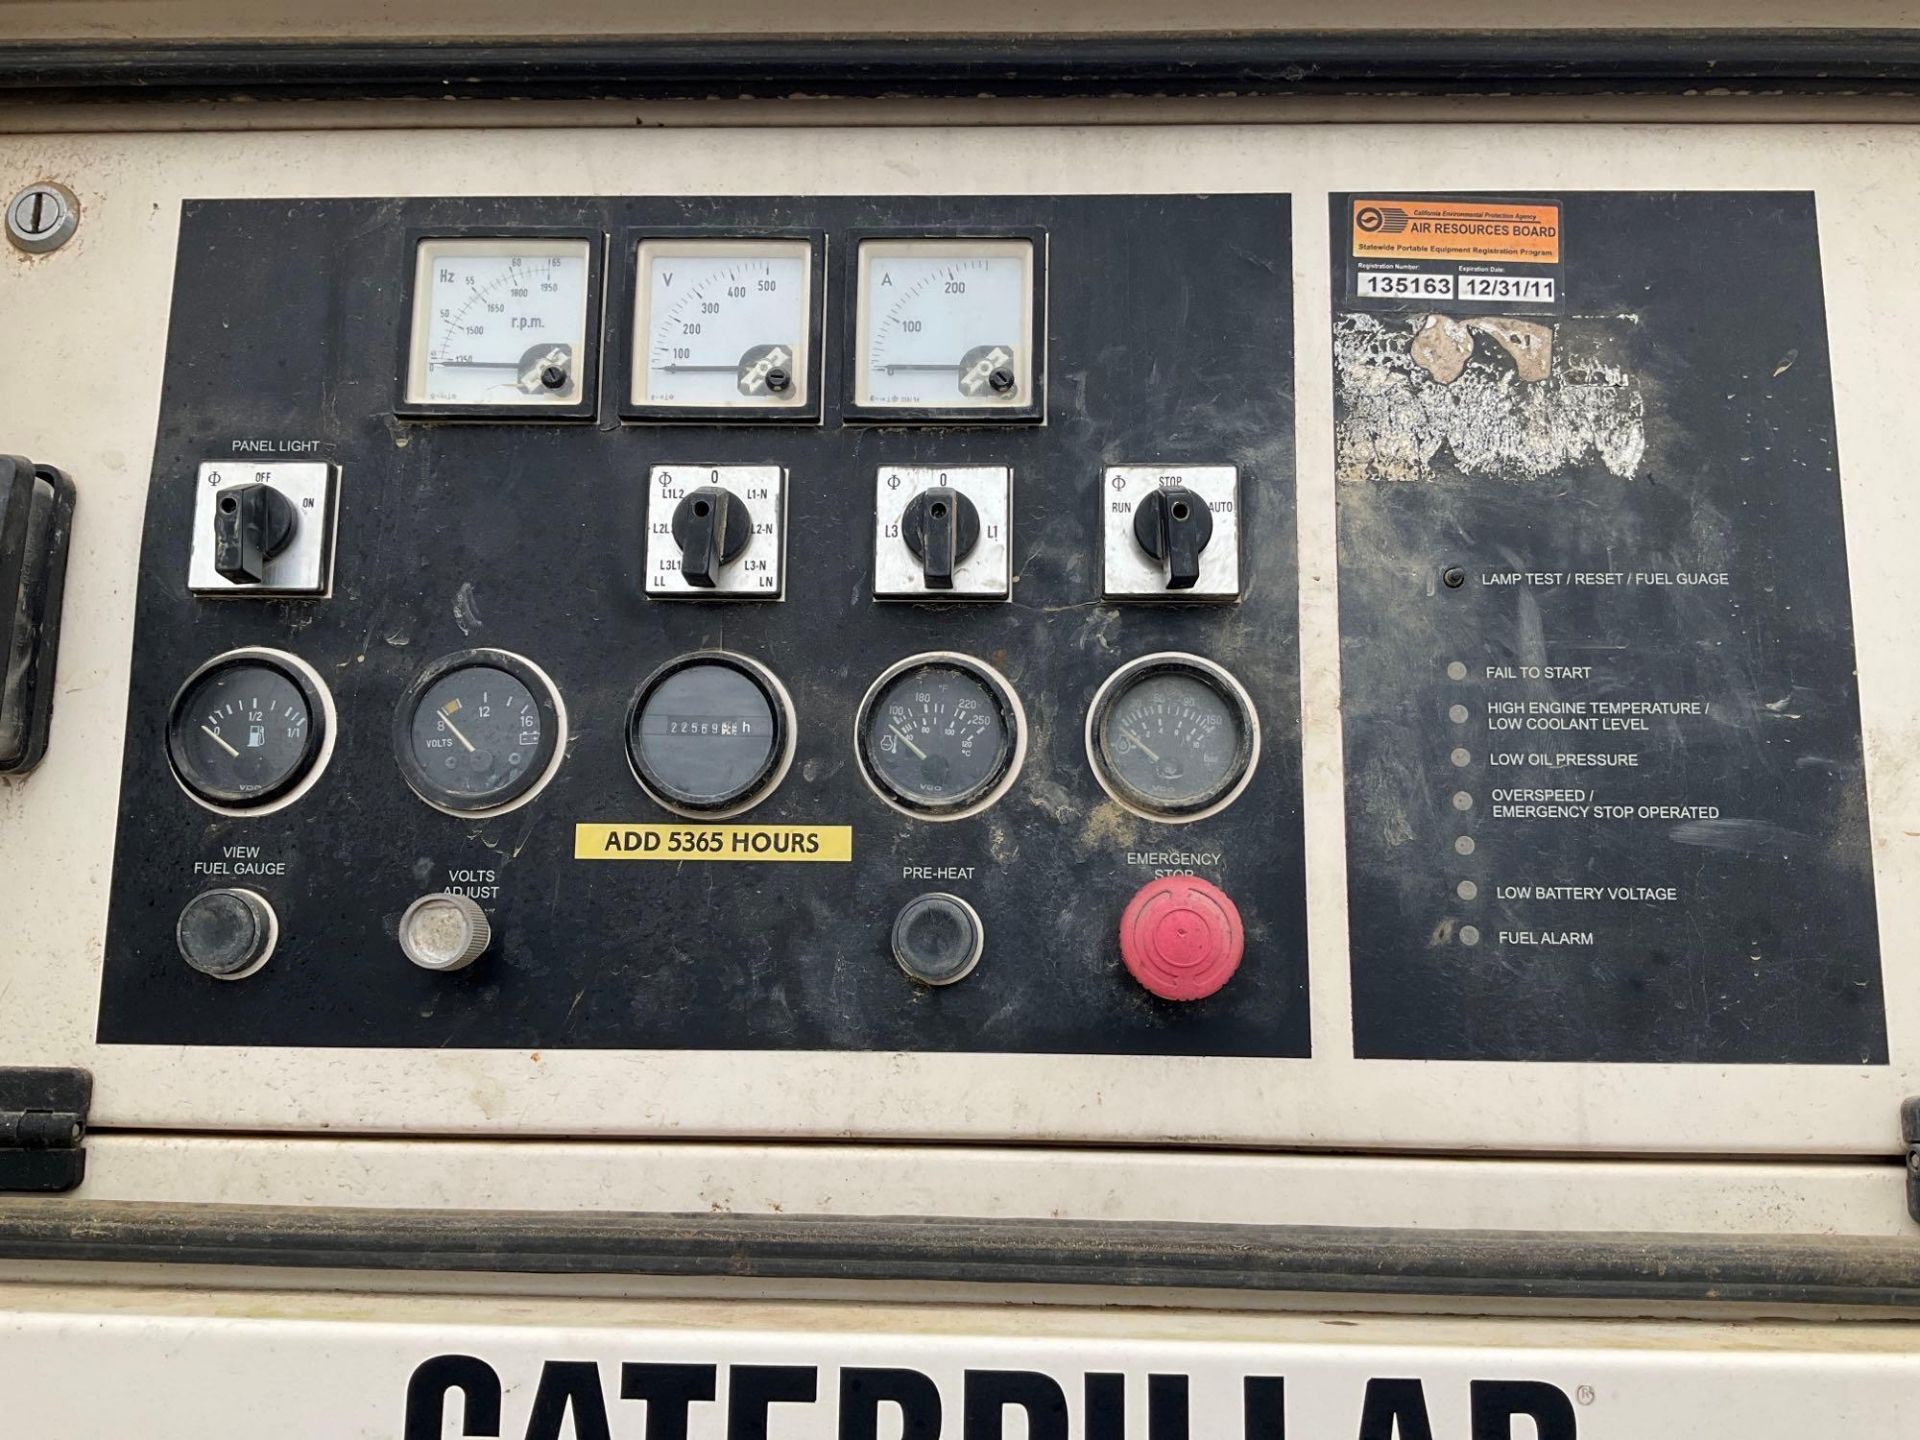 CATERPILLAR GENERATOR MODEL XQ60-4, DIESEL, PERKINS ENGINE, APPROX PHASE 3, APPROX RATED STAND BY PO - Image 16 of 28